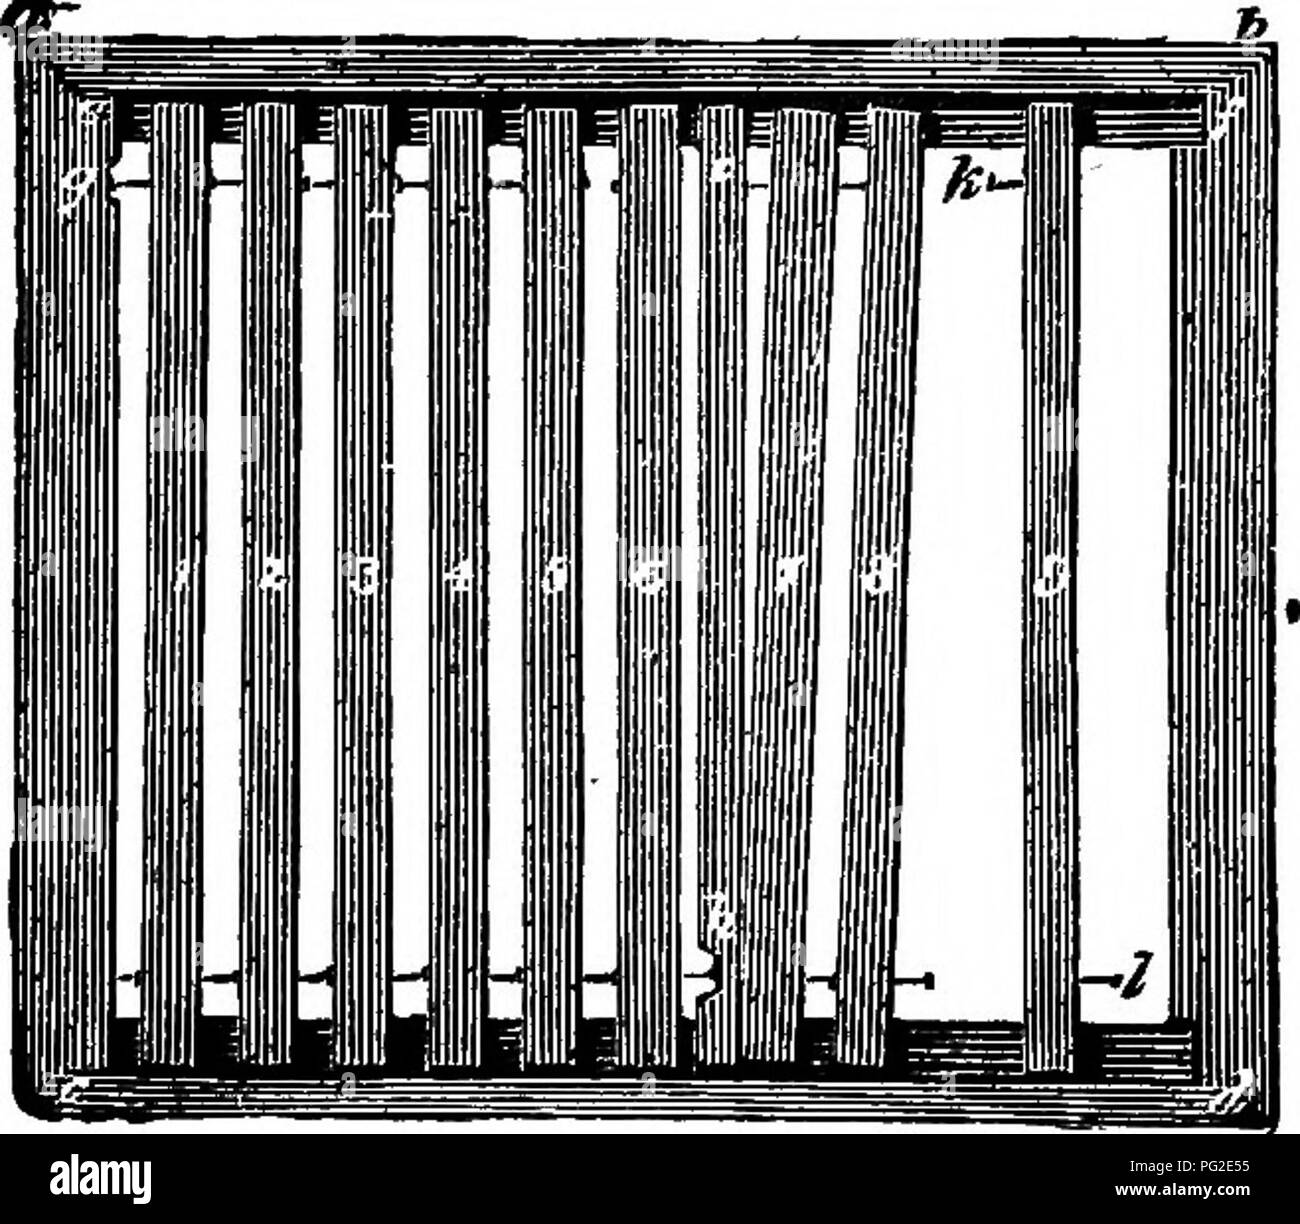 . A manual of bee-keeping. Bees. 86 A MANUAL OF BEE-KEEPING. &quot; In order to give room for the ears of the frames, the inner skin, front and back, is made an inch shallower than the outer one. Standing 3-8tJbs of an inch above the former are two strips of zinc (i and 2, Fig. 11), each about an inch wide, and which serve to carry the frames so that they cannot be propolised, while they—i. e. the frames—can be slidden backwards and forwards with the greatest ease during manipulation. The top bar ol the frame is 3-8ths thick, so that the space between the top bar and the cover is  inch. The d Stock Photo